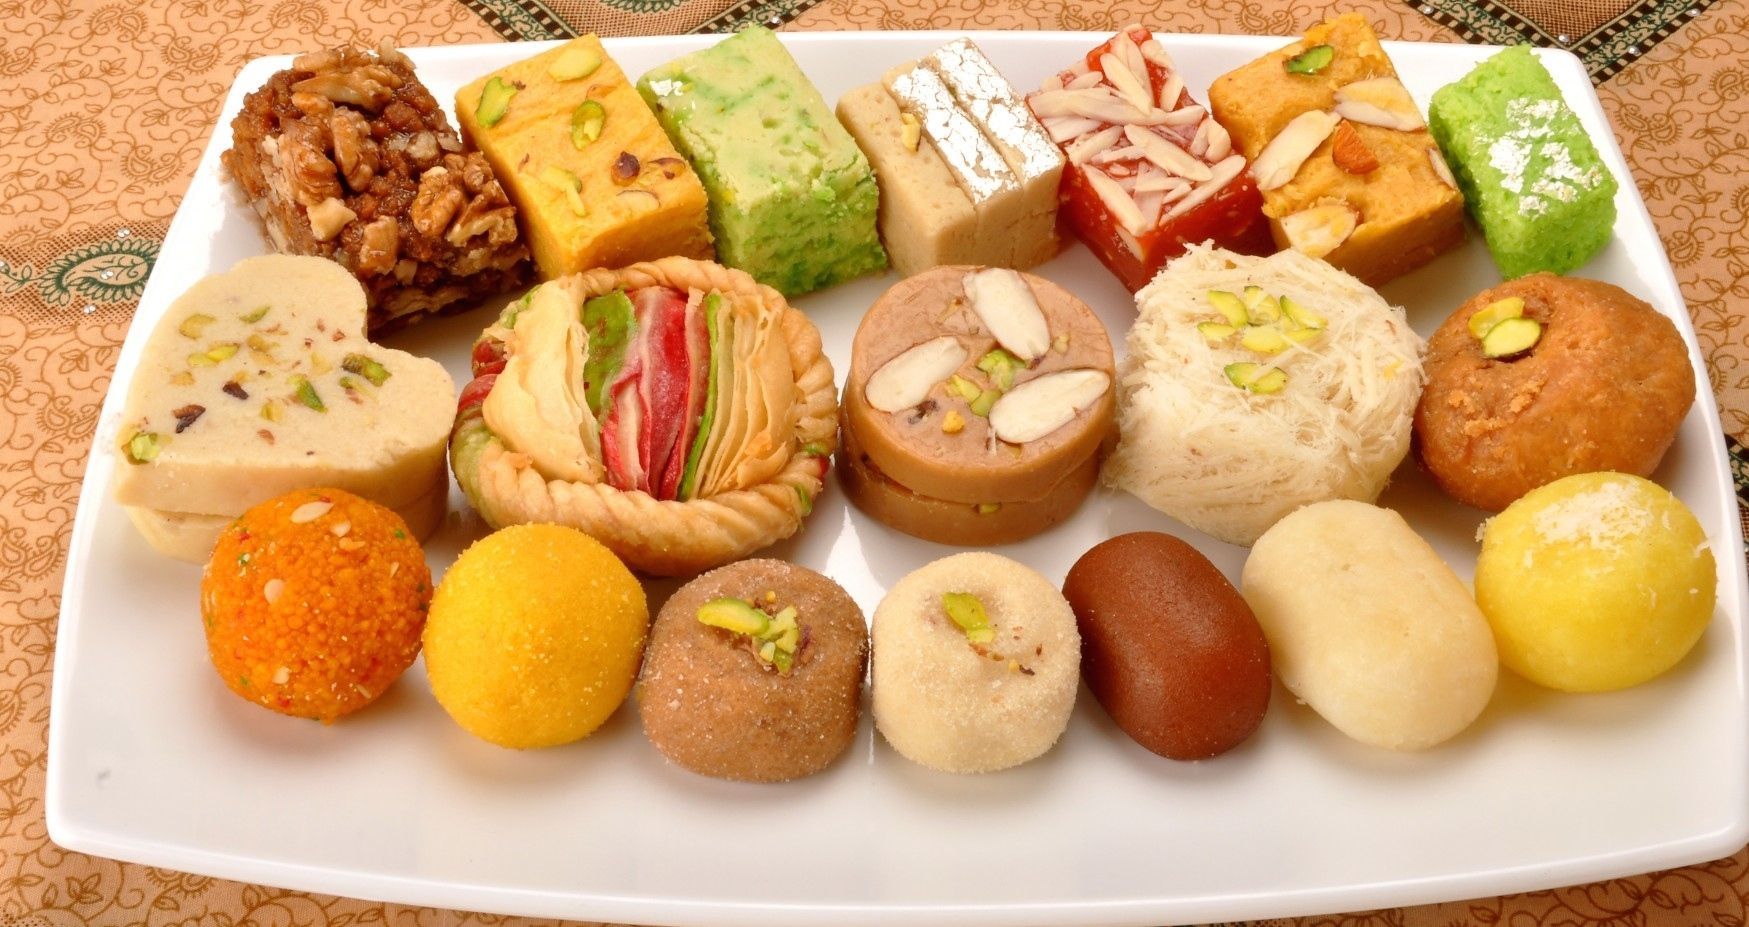 Diwali 2015: Traditional foods for the Hindu Festival. Food